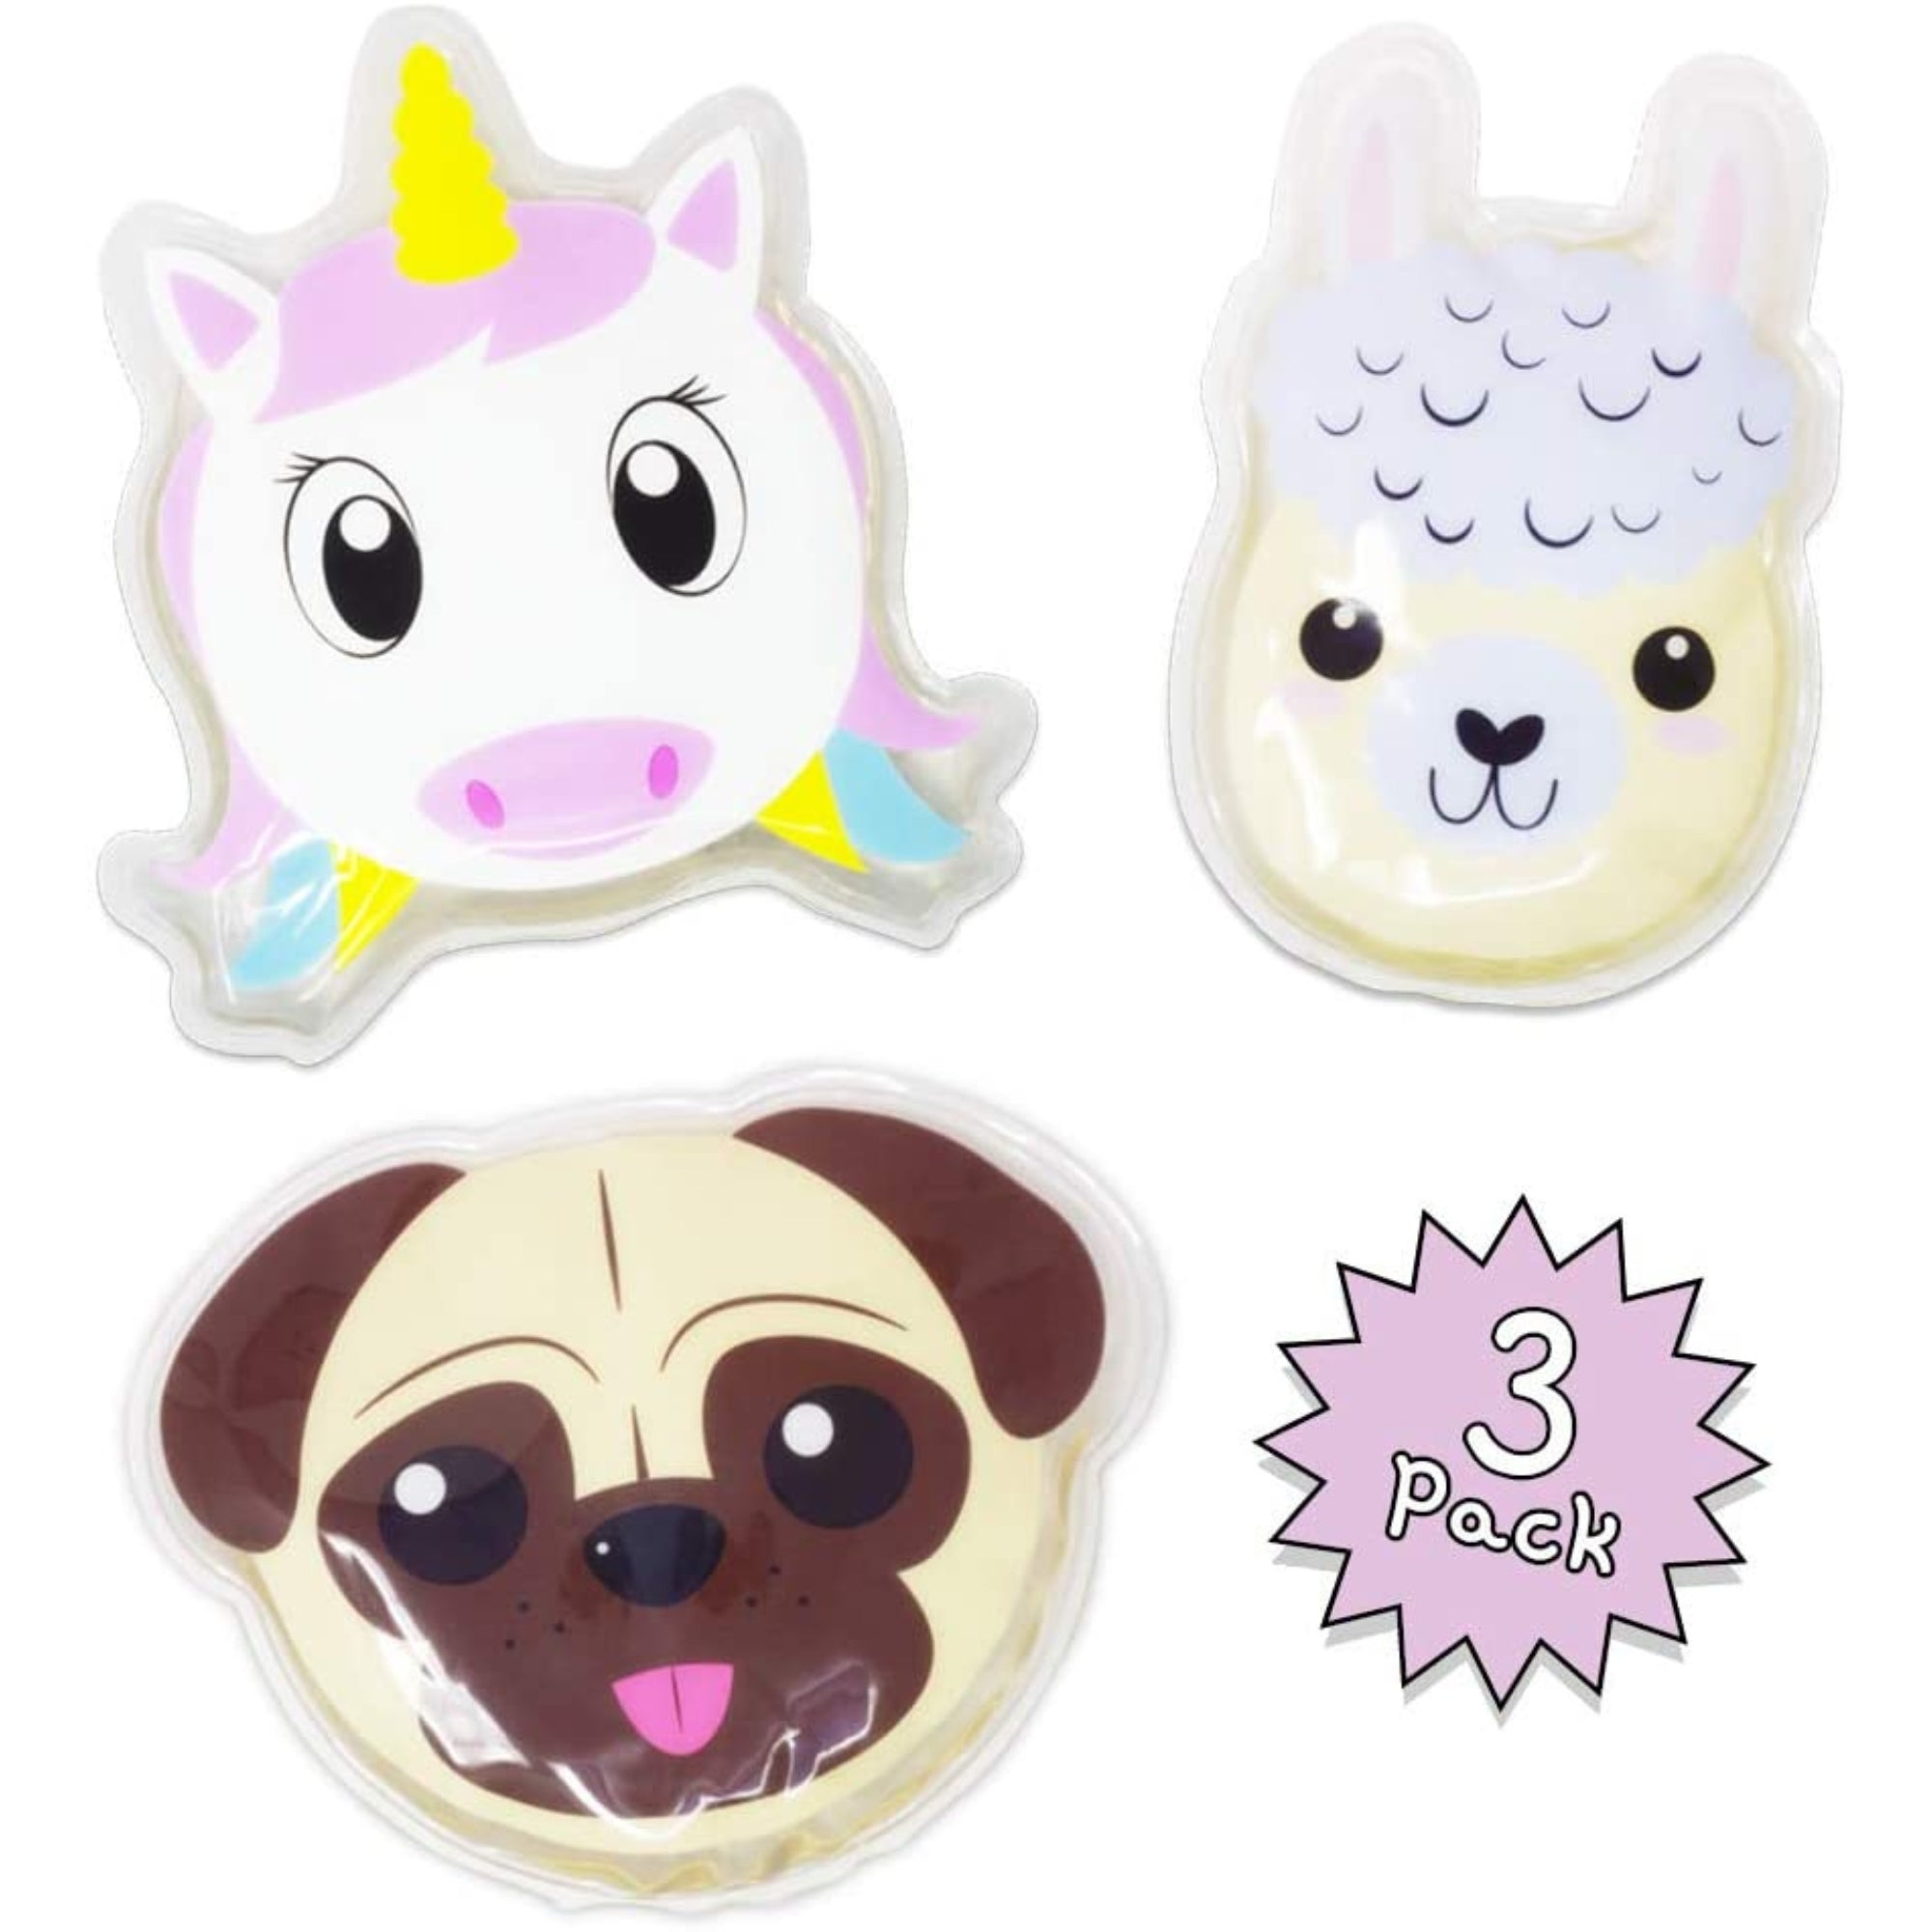 Dynamik - Ice Cold Compress for Kids - 3 Pack for Girls - Unicorn, Llama, Pug